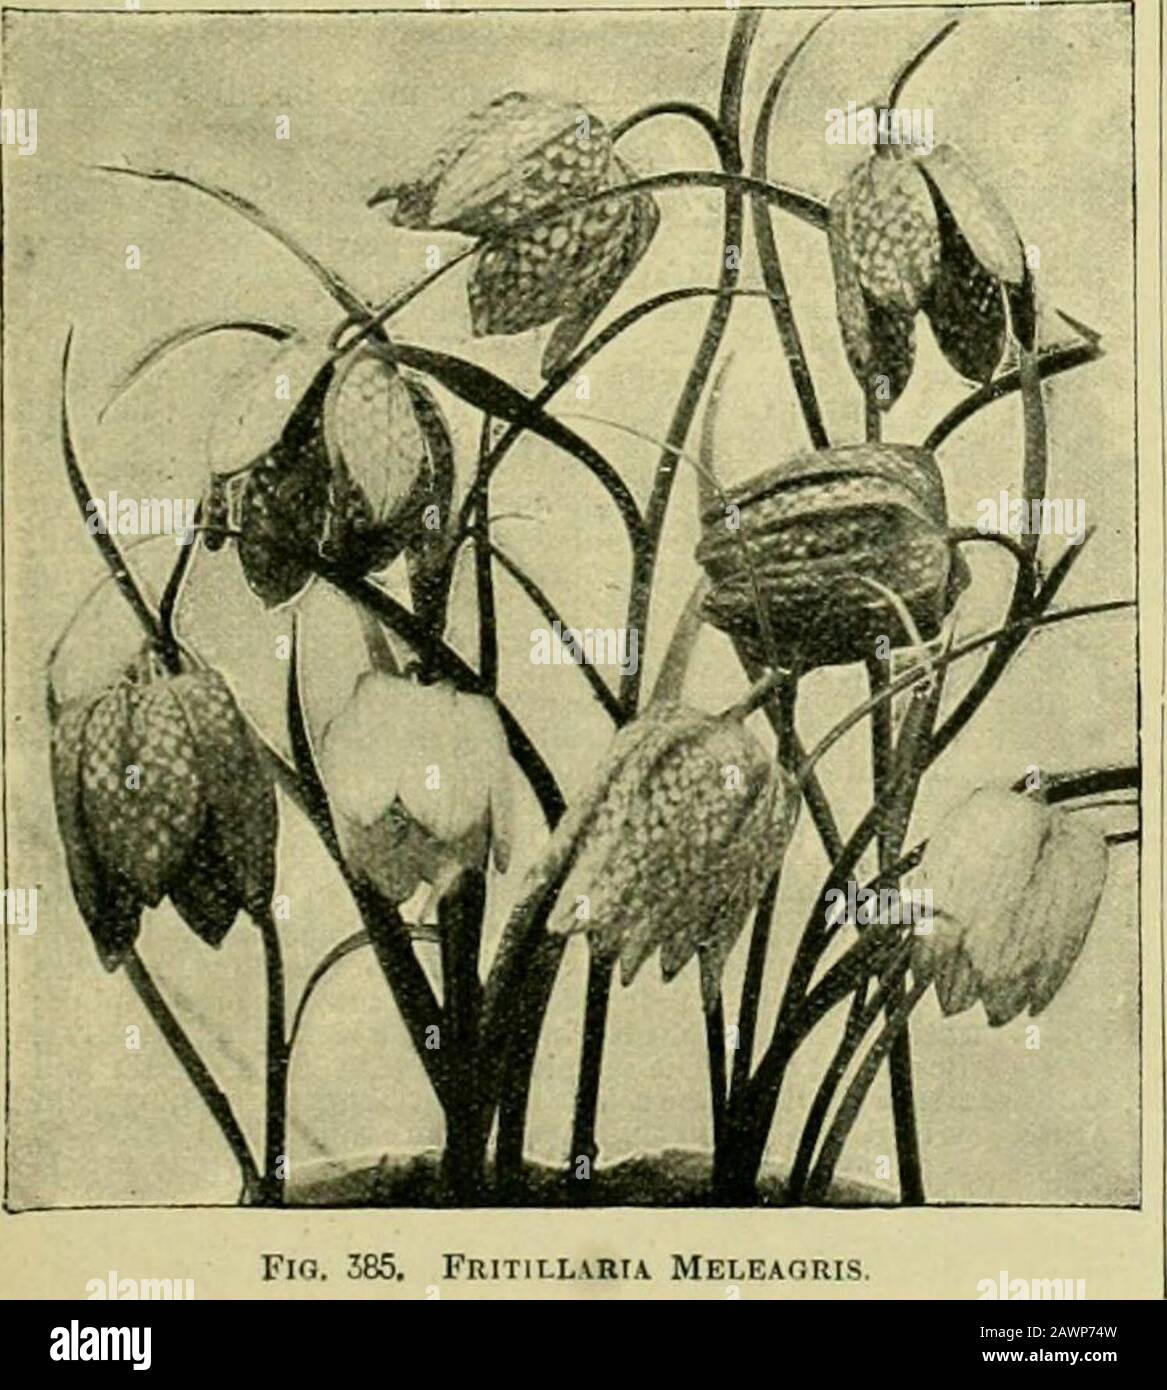 The century supplement to the dictionary of gardening, a practical and scientific encyclopaedia of horticulture for gardeners and botanists . ia). Ord. Bigvoniacesc. A small genus(two or three species) of tall-climldng, stove sln-ubs, nativesof Brazil, and closely allied to Biynonia. Flowers scarletor yellowish-red, in an ample panicle. Leaves opposite,trifoliolate. Ono of the species has been introduced. Forculture, tee Bignonia.F. Guillelma (Williams). /. seven in a compact, terminal panicle ; calyx and especially the corolla often .six-cleft. I. ovate- olilnn-^, acute at base, shoitlv acumi Stock Photo